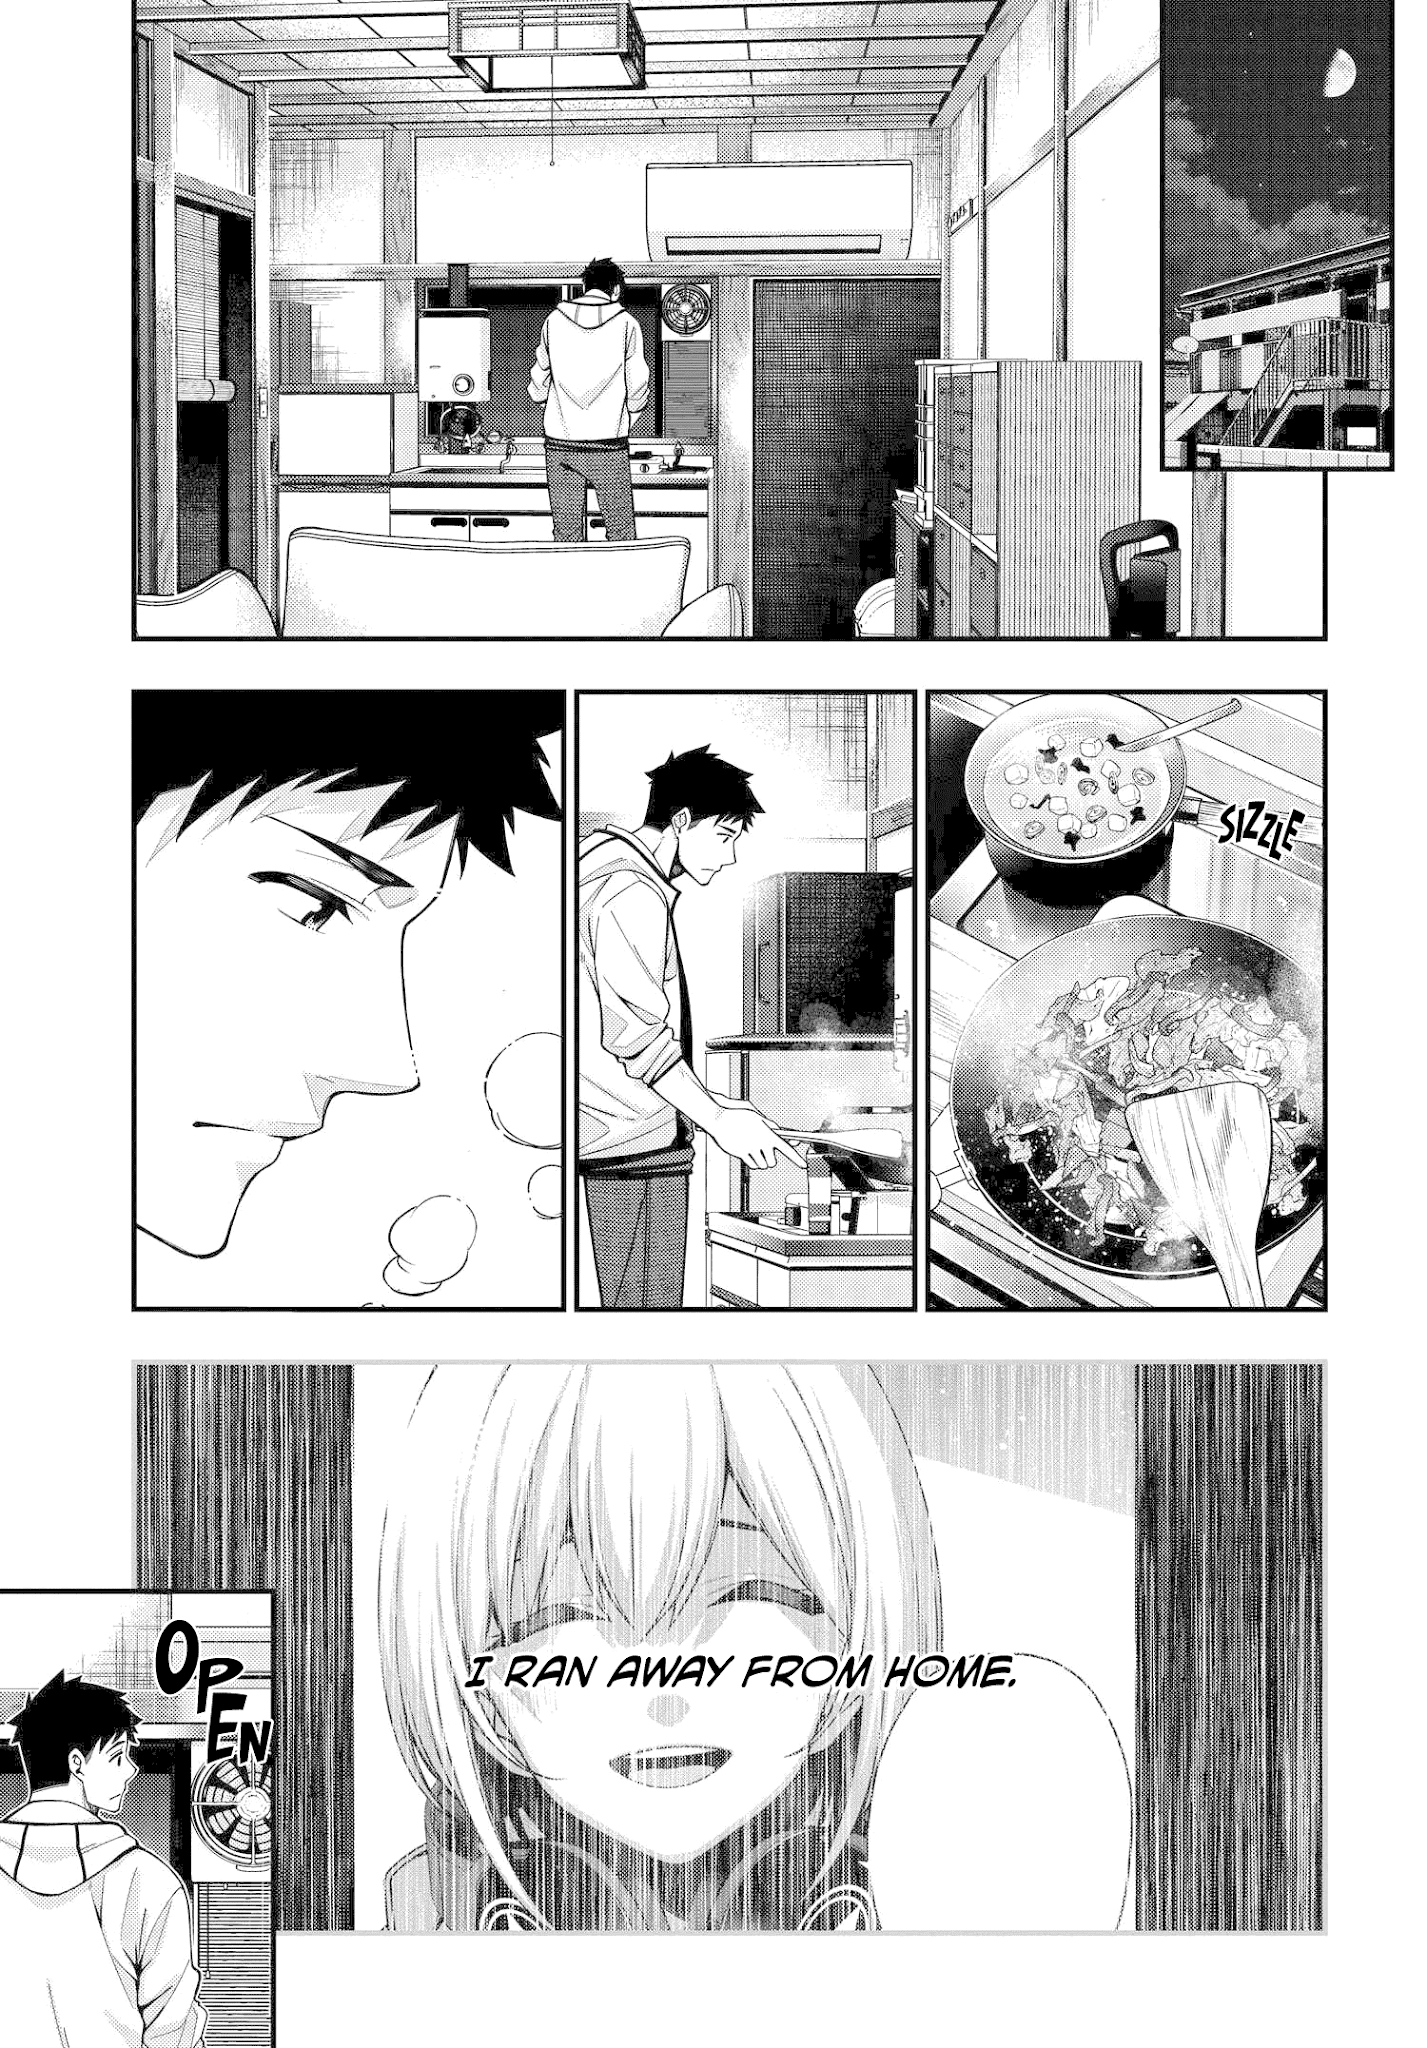 A Choice Of Boyfriend And Girlfriend - Page 1